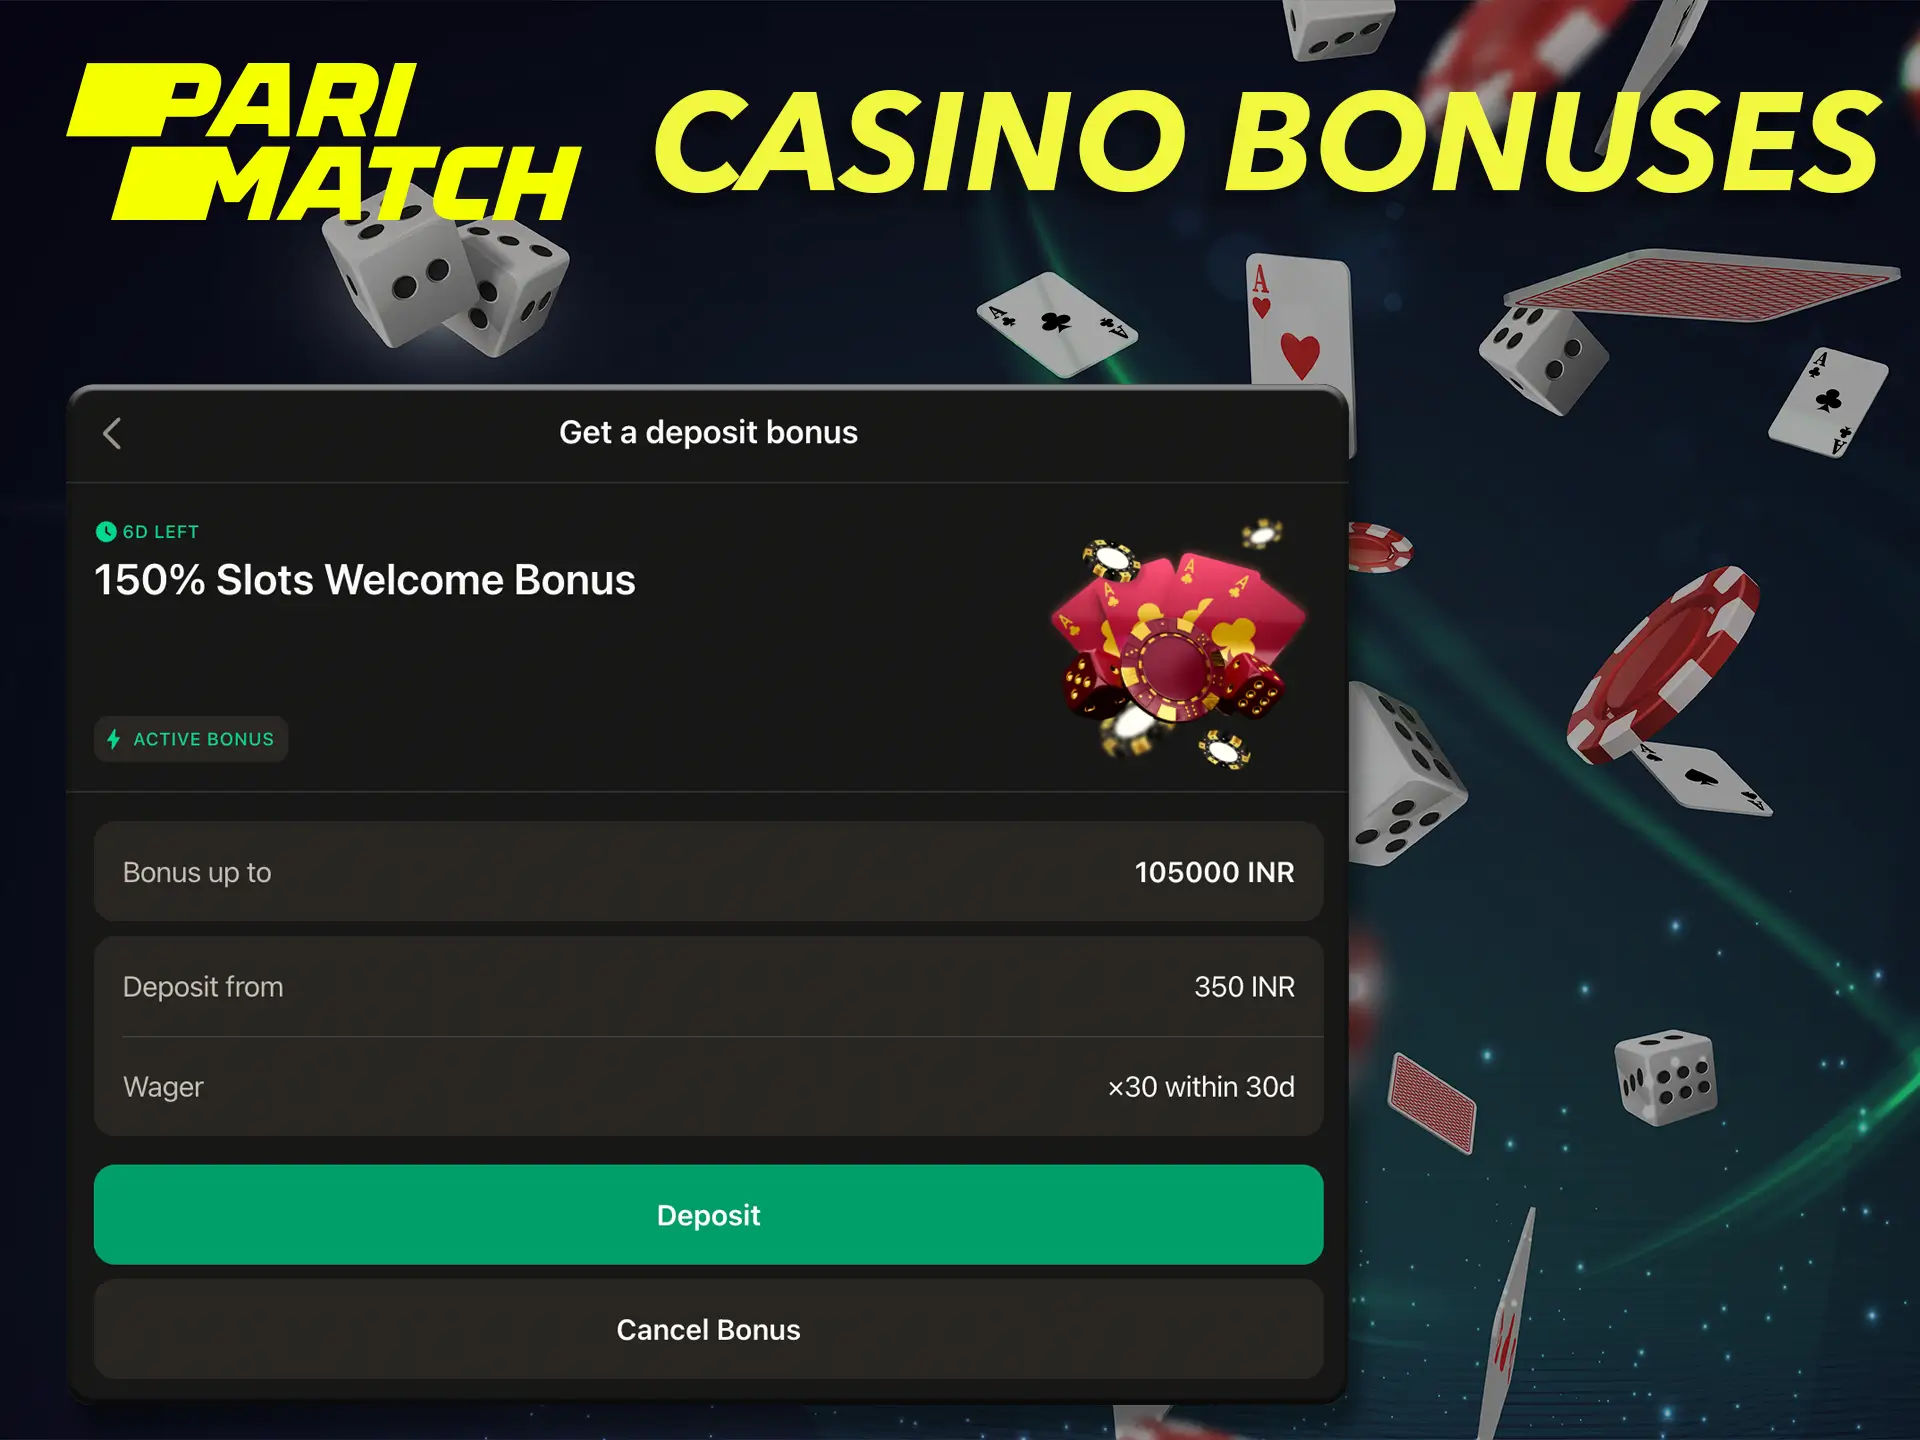 Play and up your game at Parimatch Casino thanks to the welcome bonus.